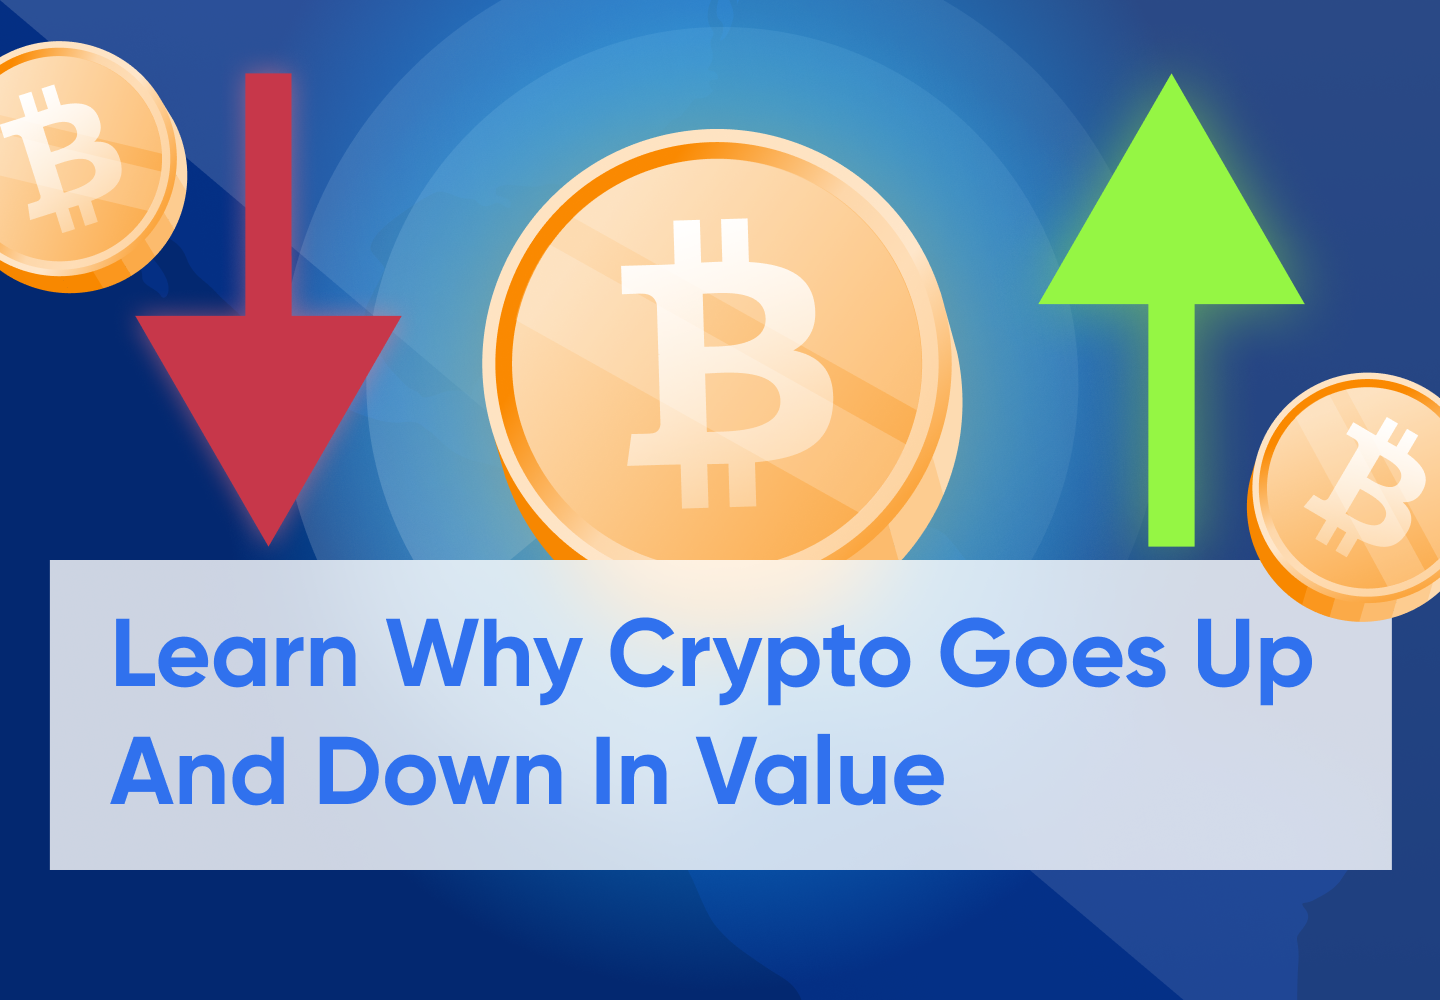 what makes crypto go up in price